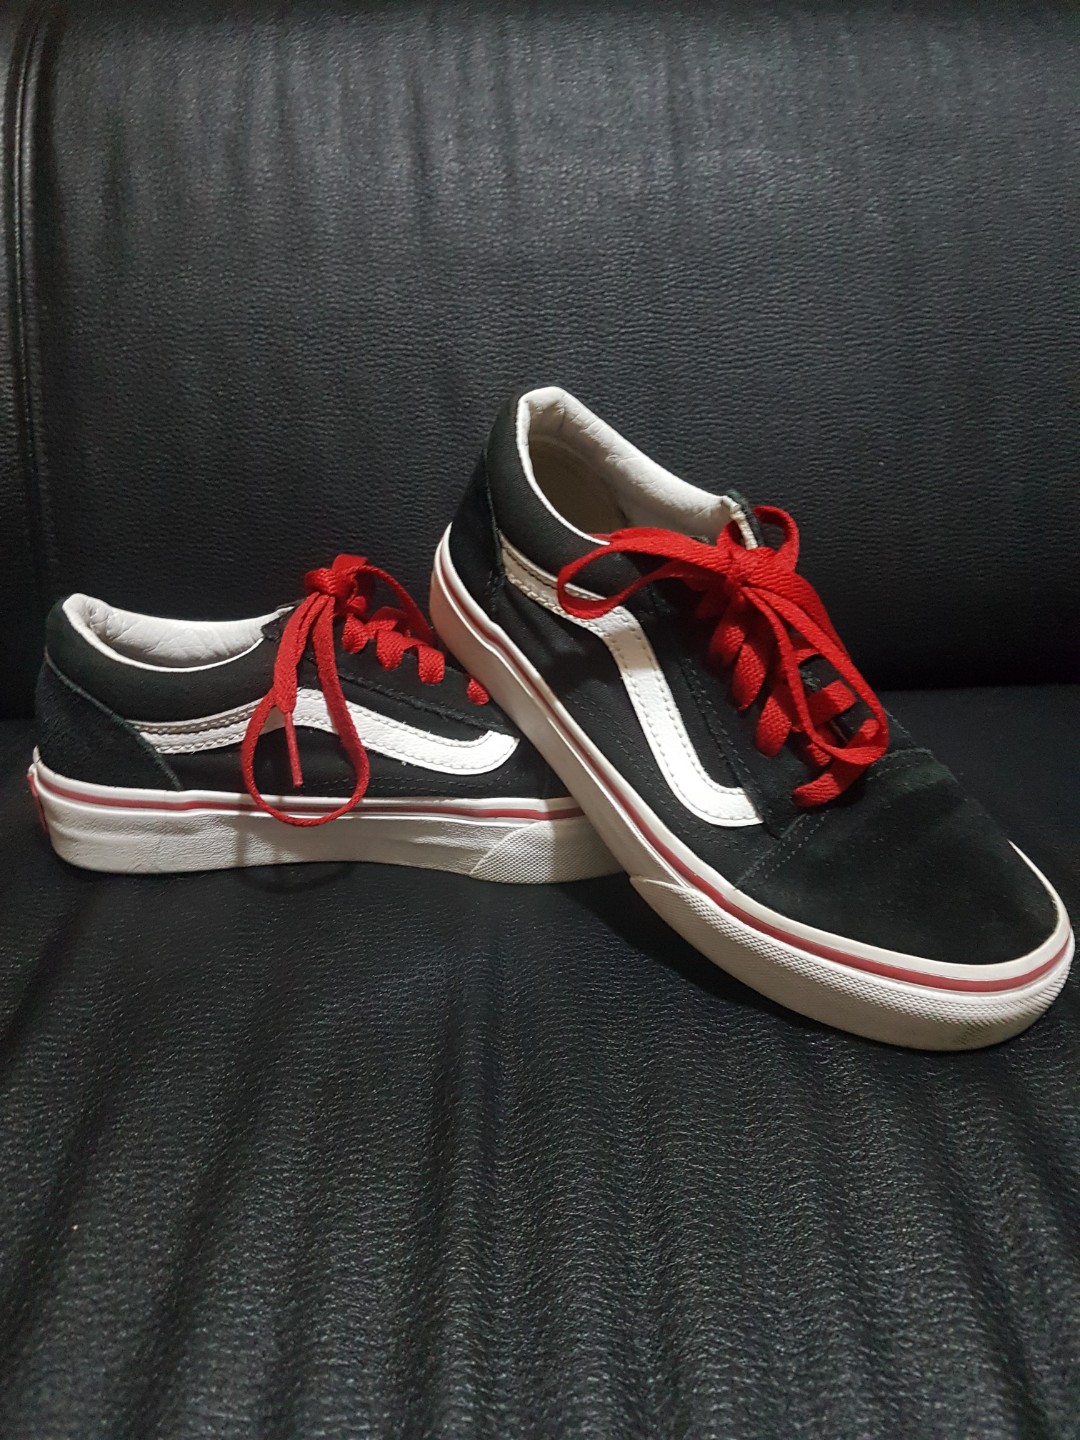 vans with red laces